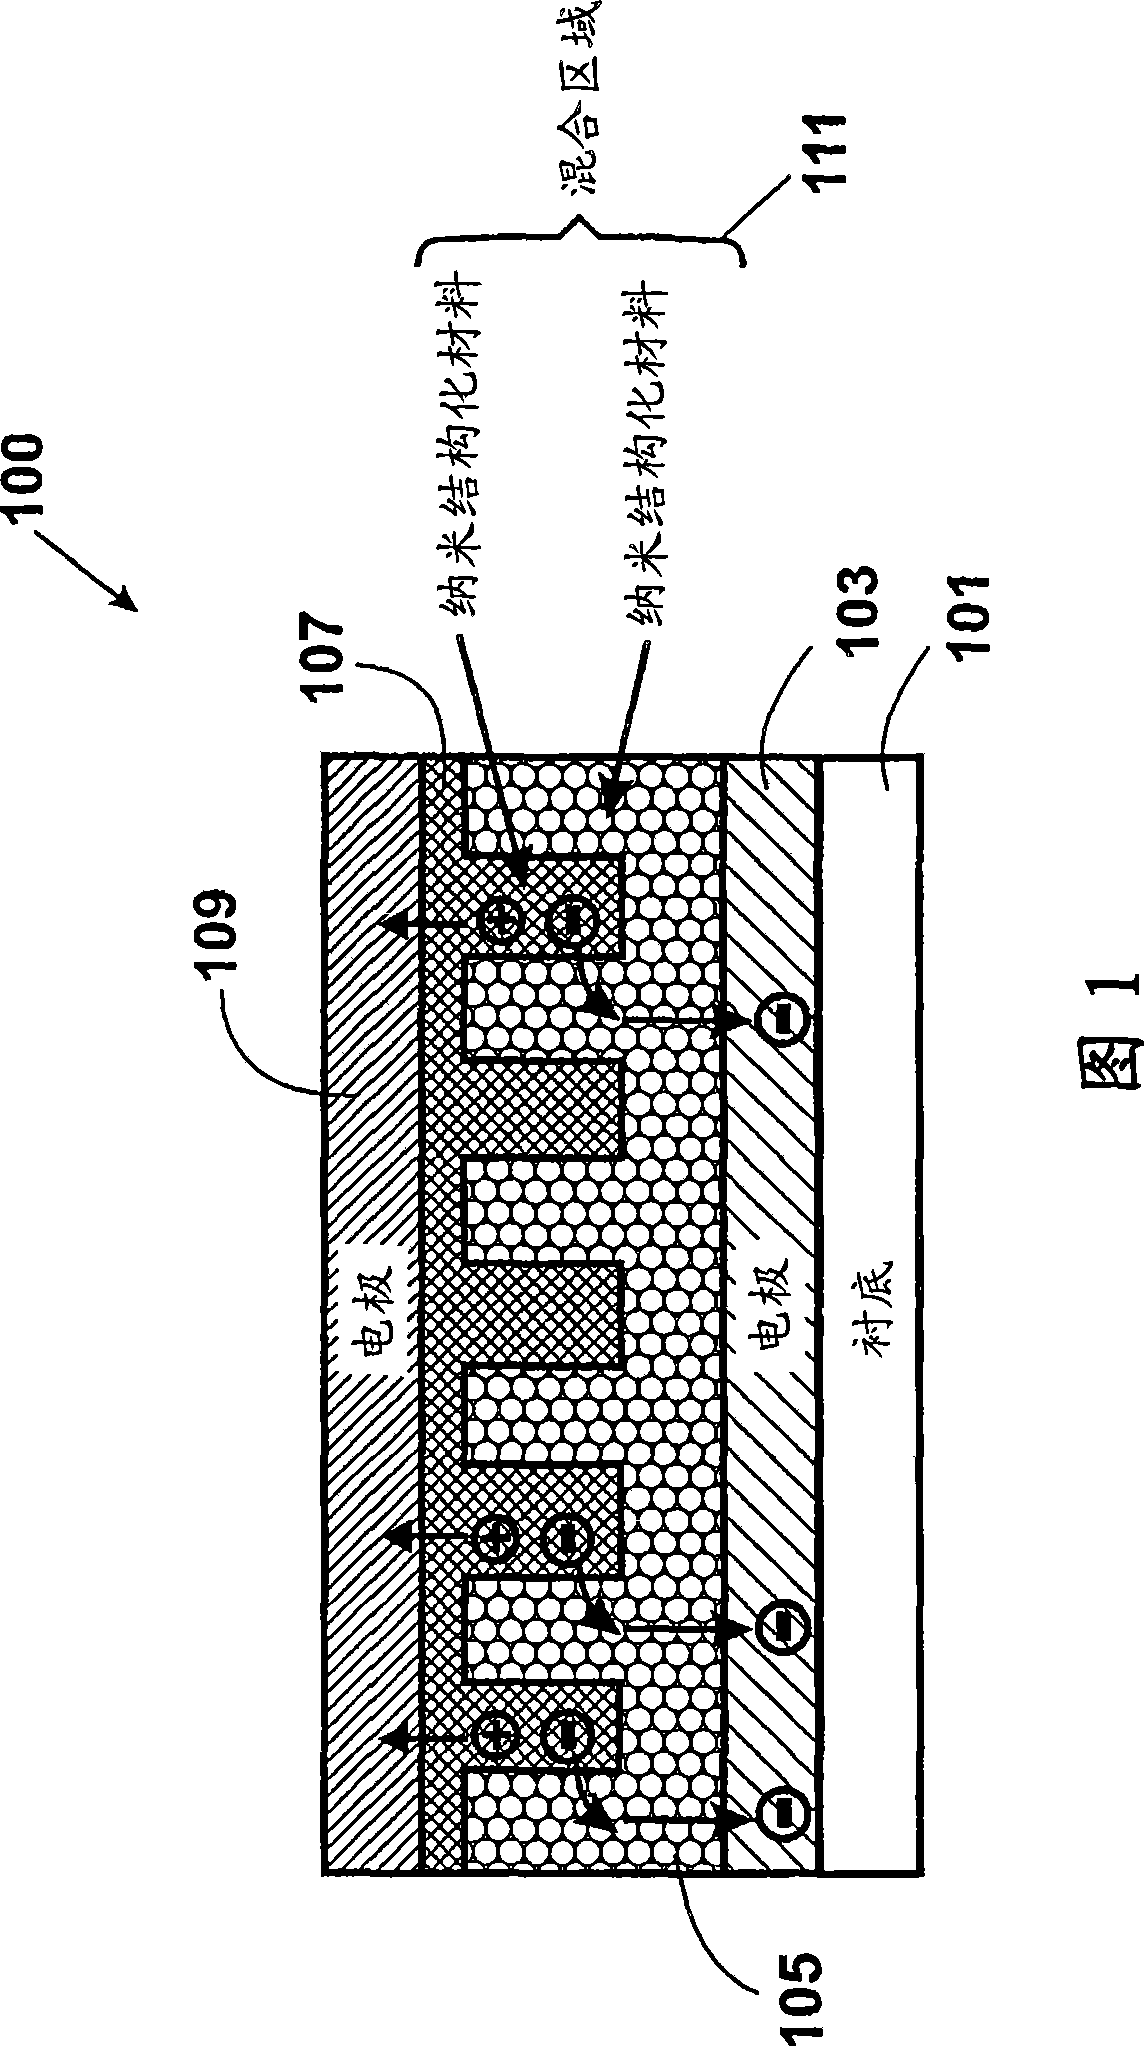 Method and structure for thin film photovoltaic materials using semiconductor materials